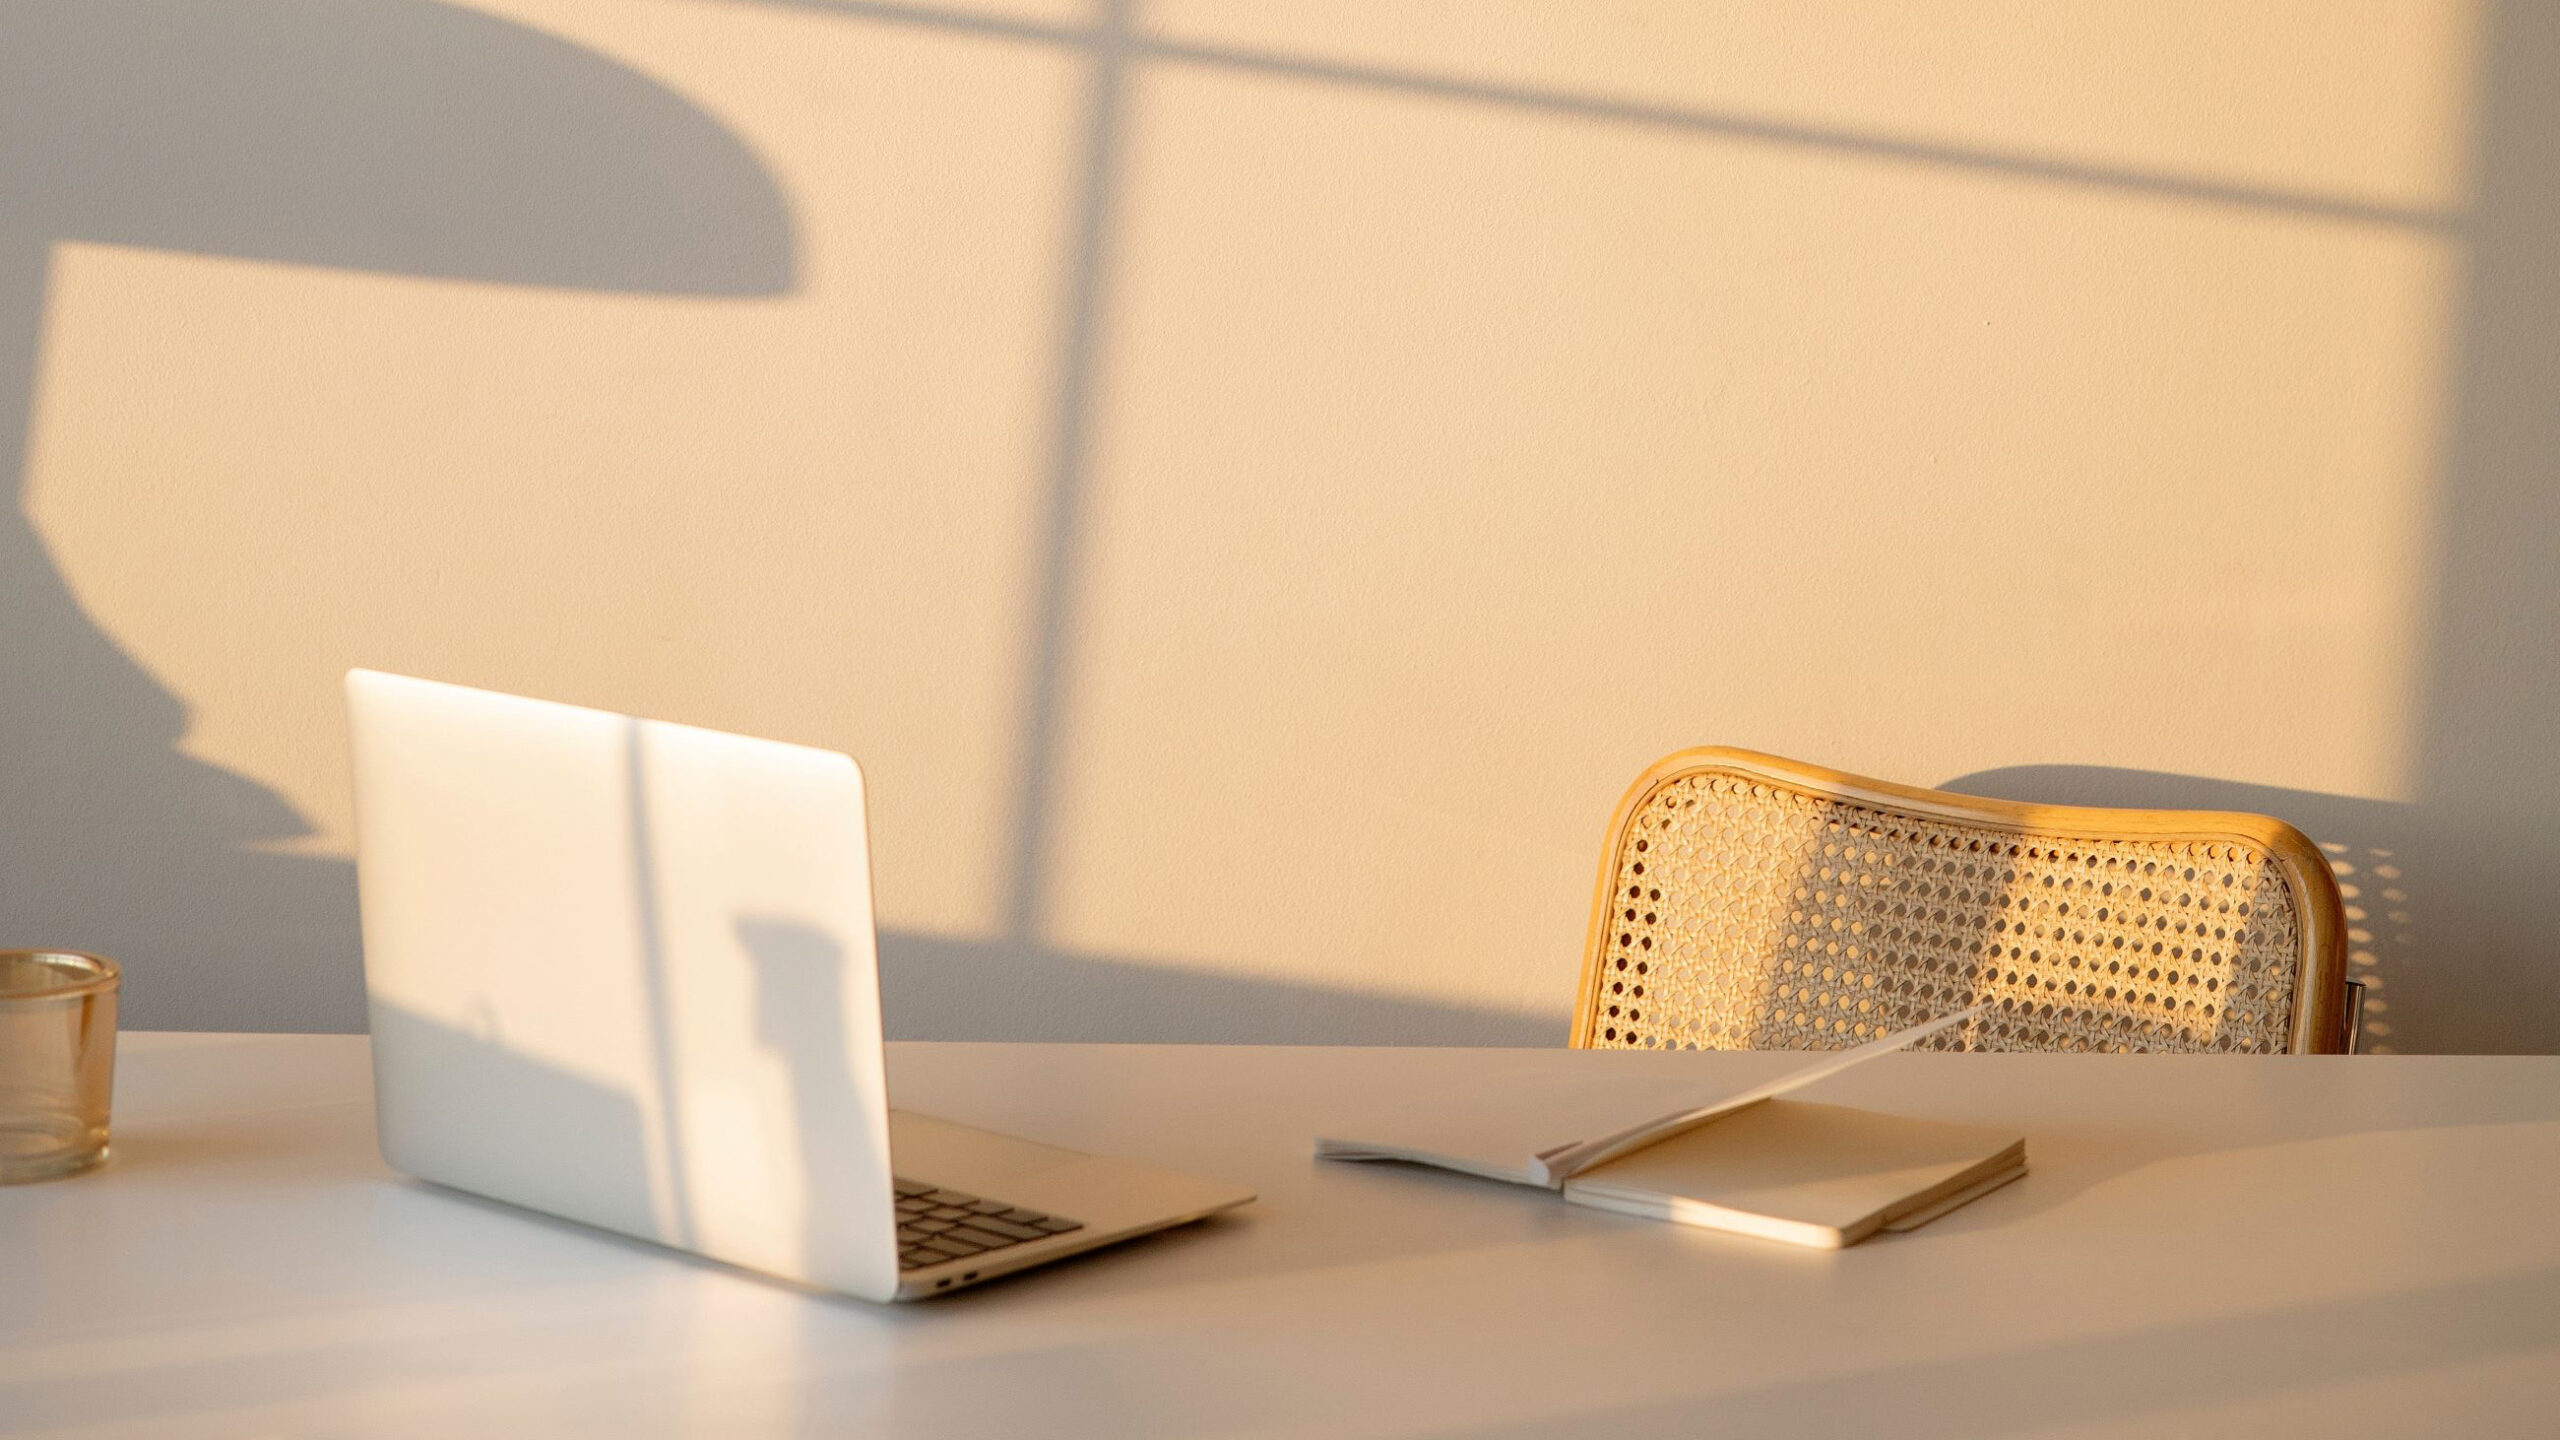 laptop and notebook on a clean desk at golden hour with shadows on the wall